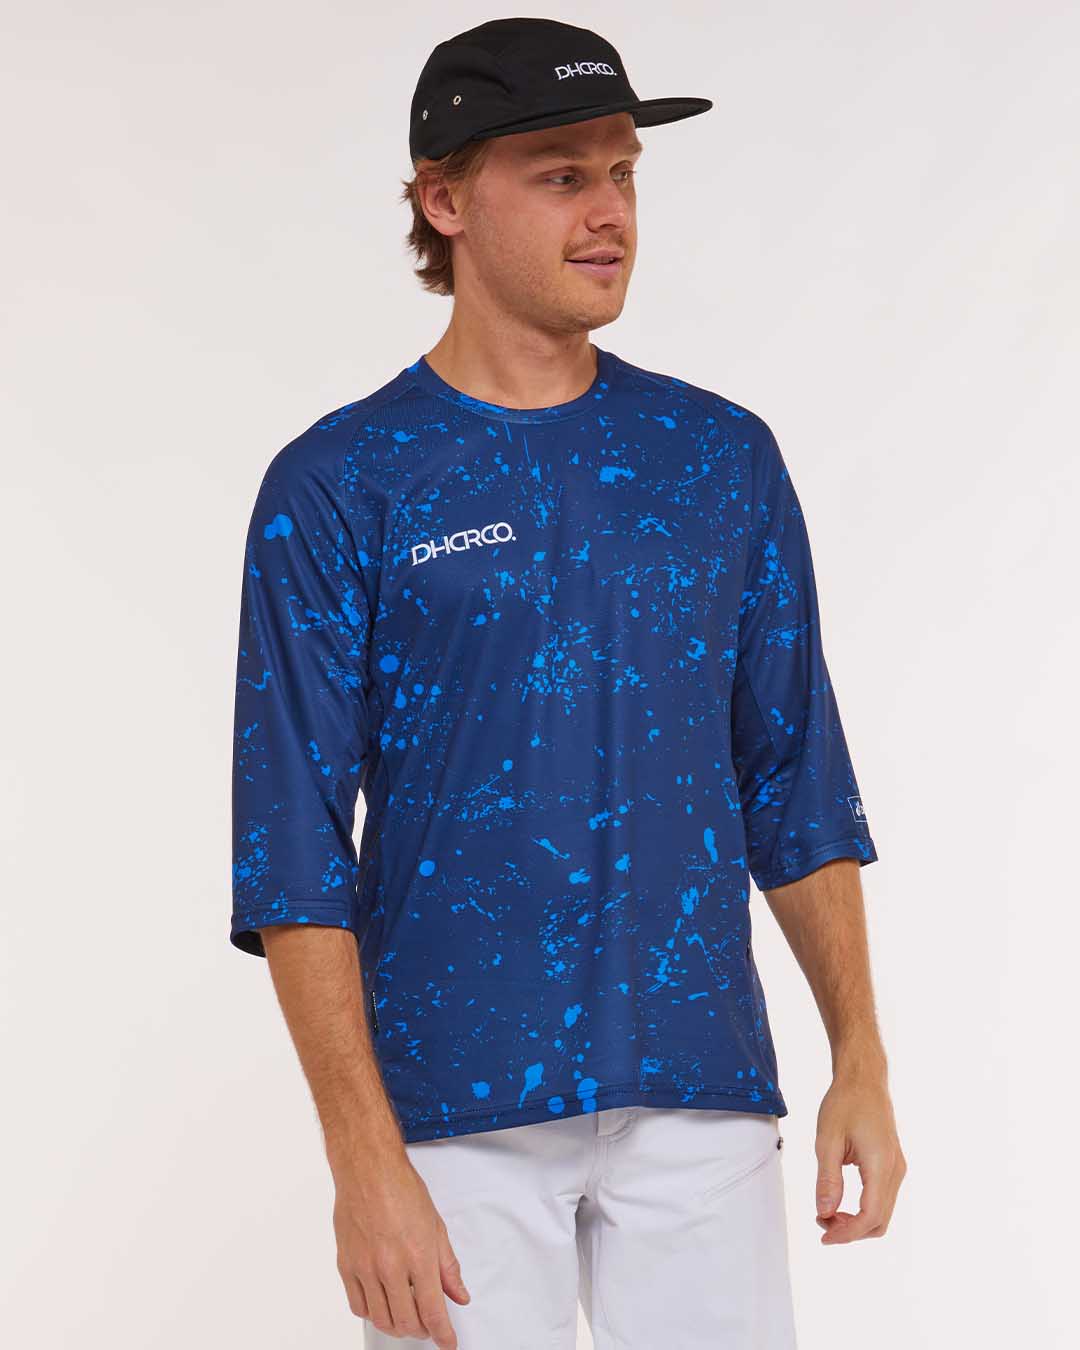 Mens 3/4 Sleeve Jersey | Out of the Blue